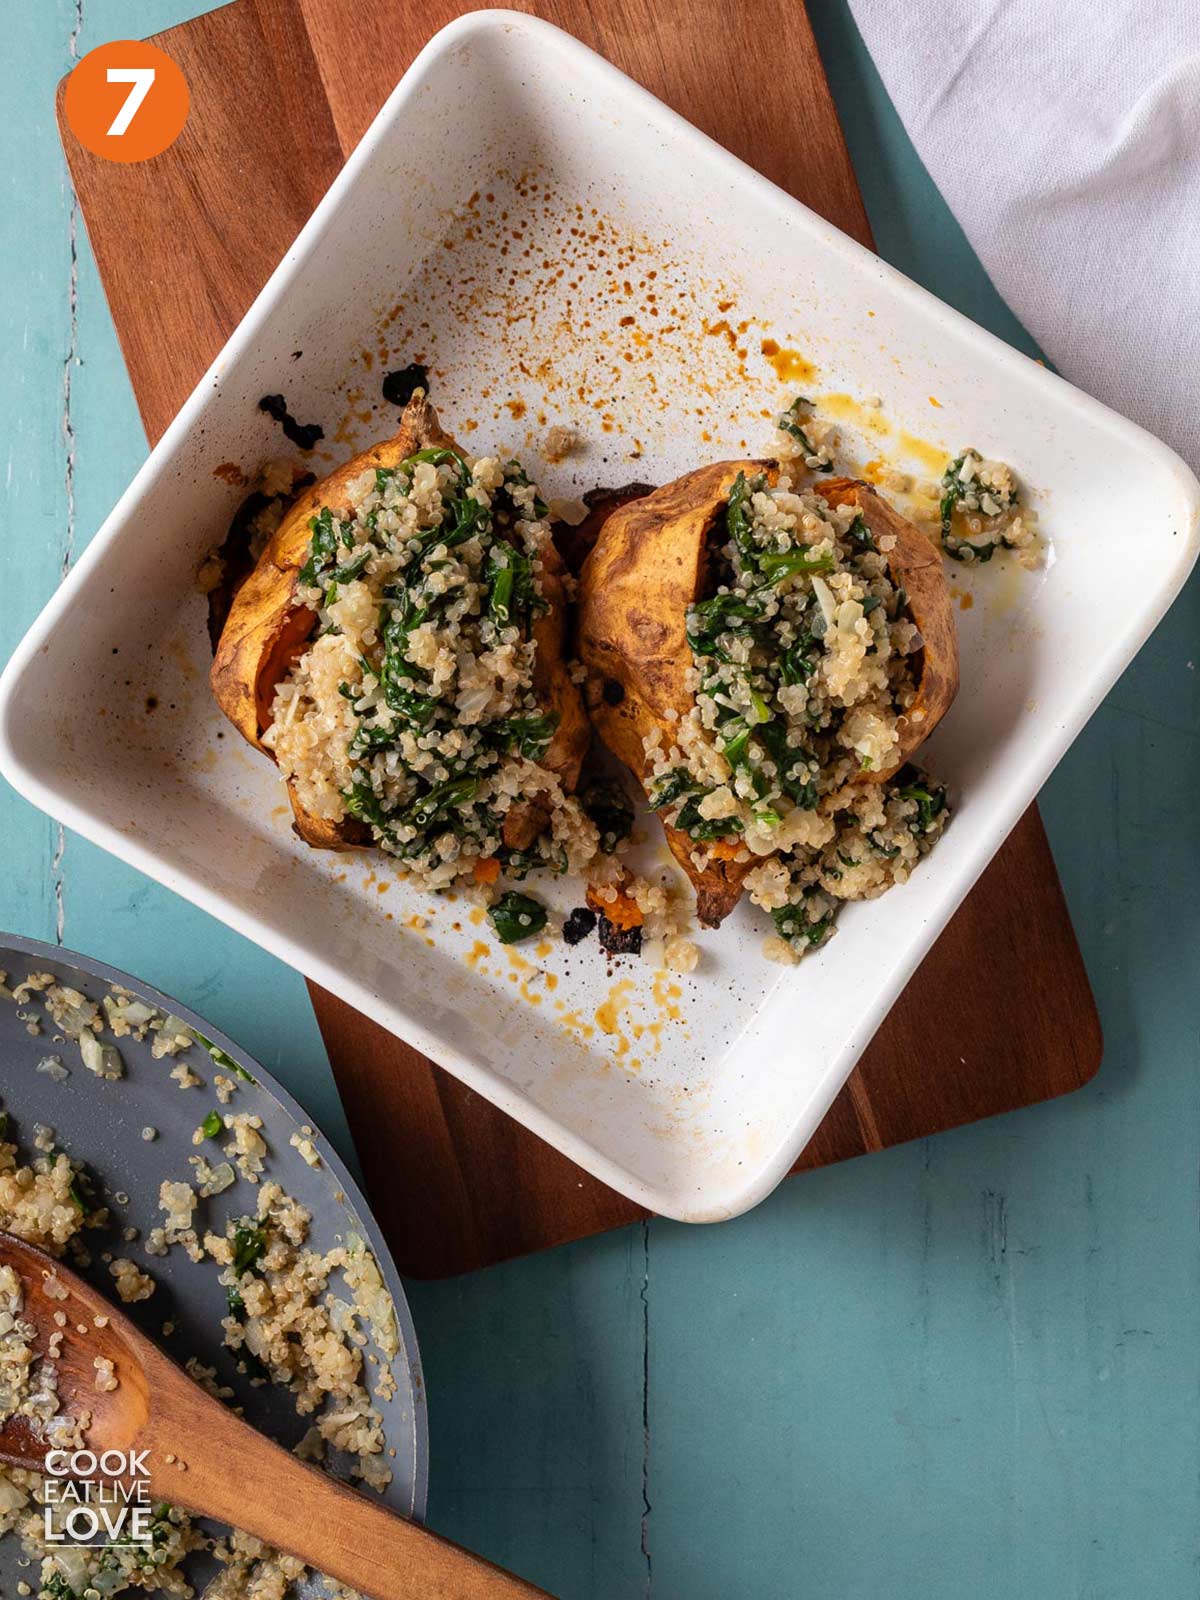 Quinoa and spinach mixture stuffed into sweet potatoes.